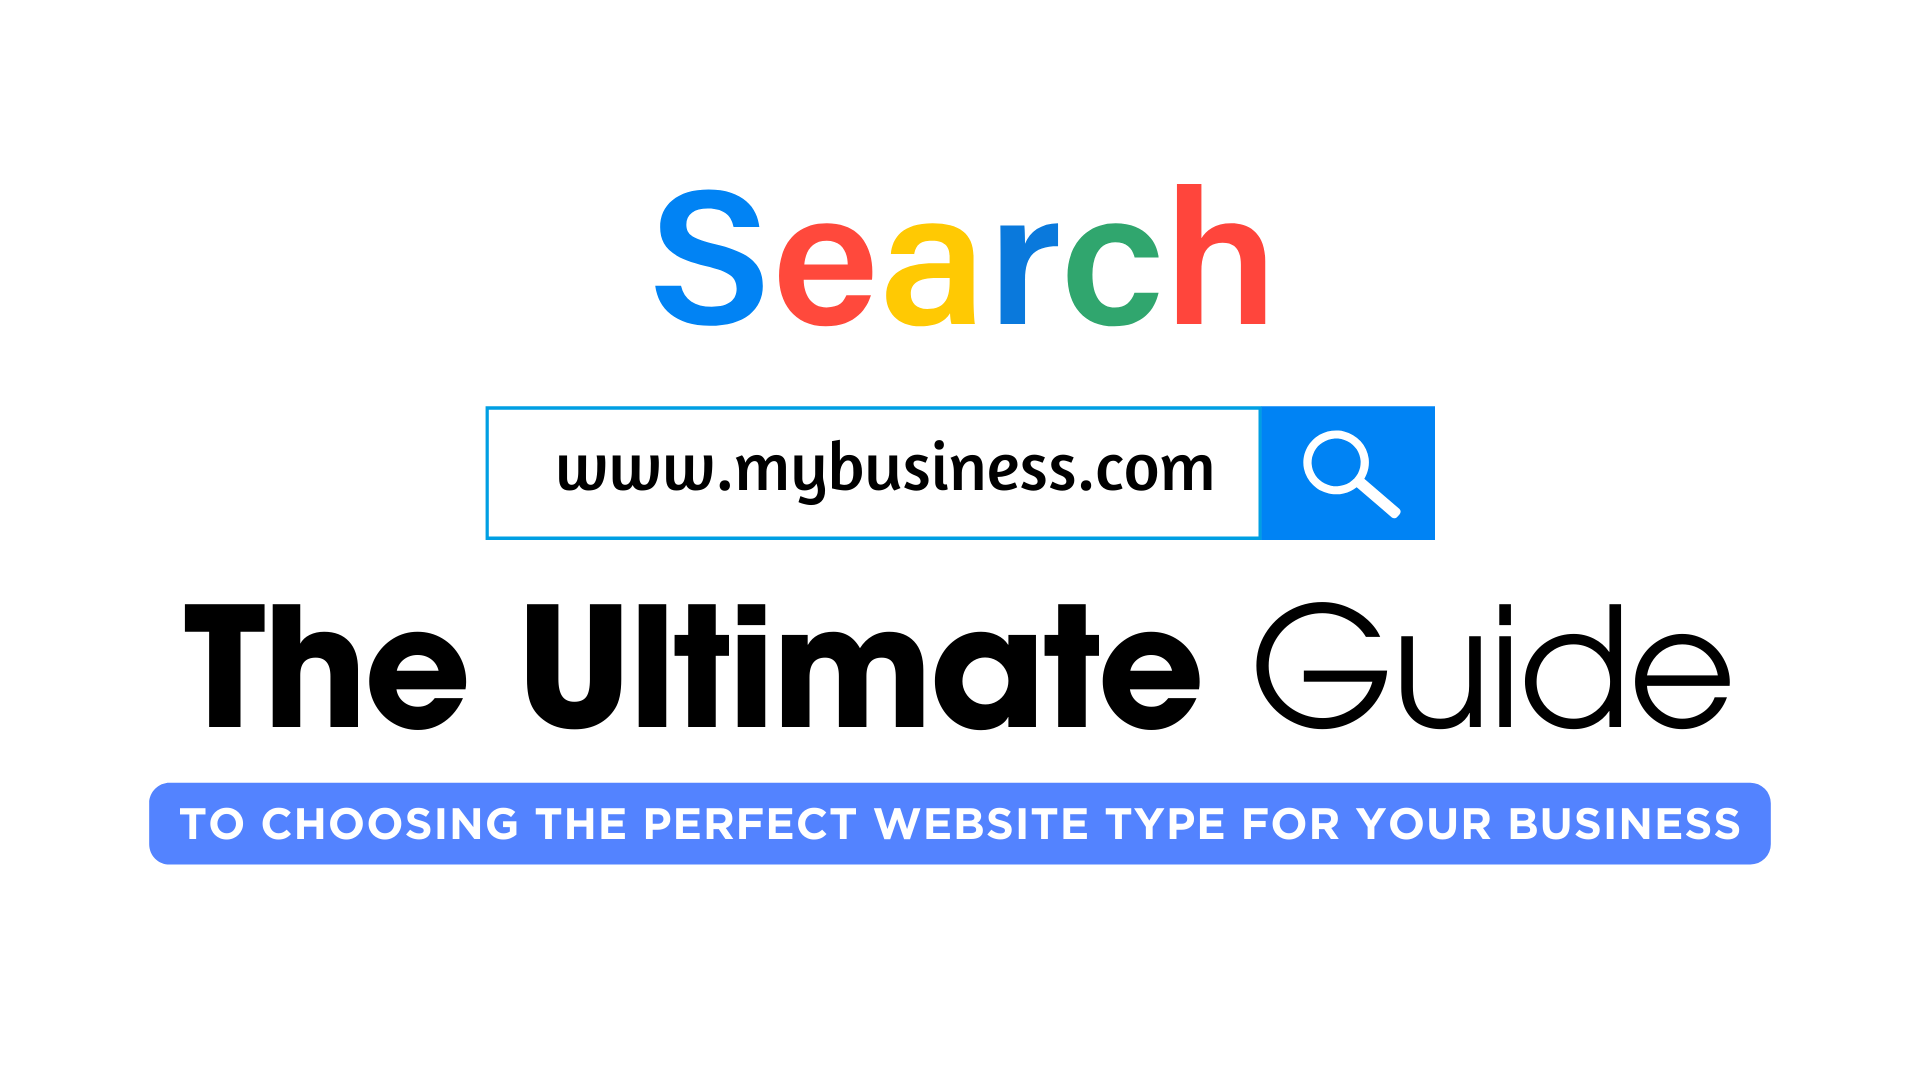 The Ultimate Guide to Choosing the Perfect Website Type for Your Business